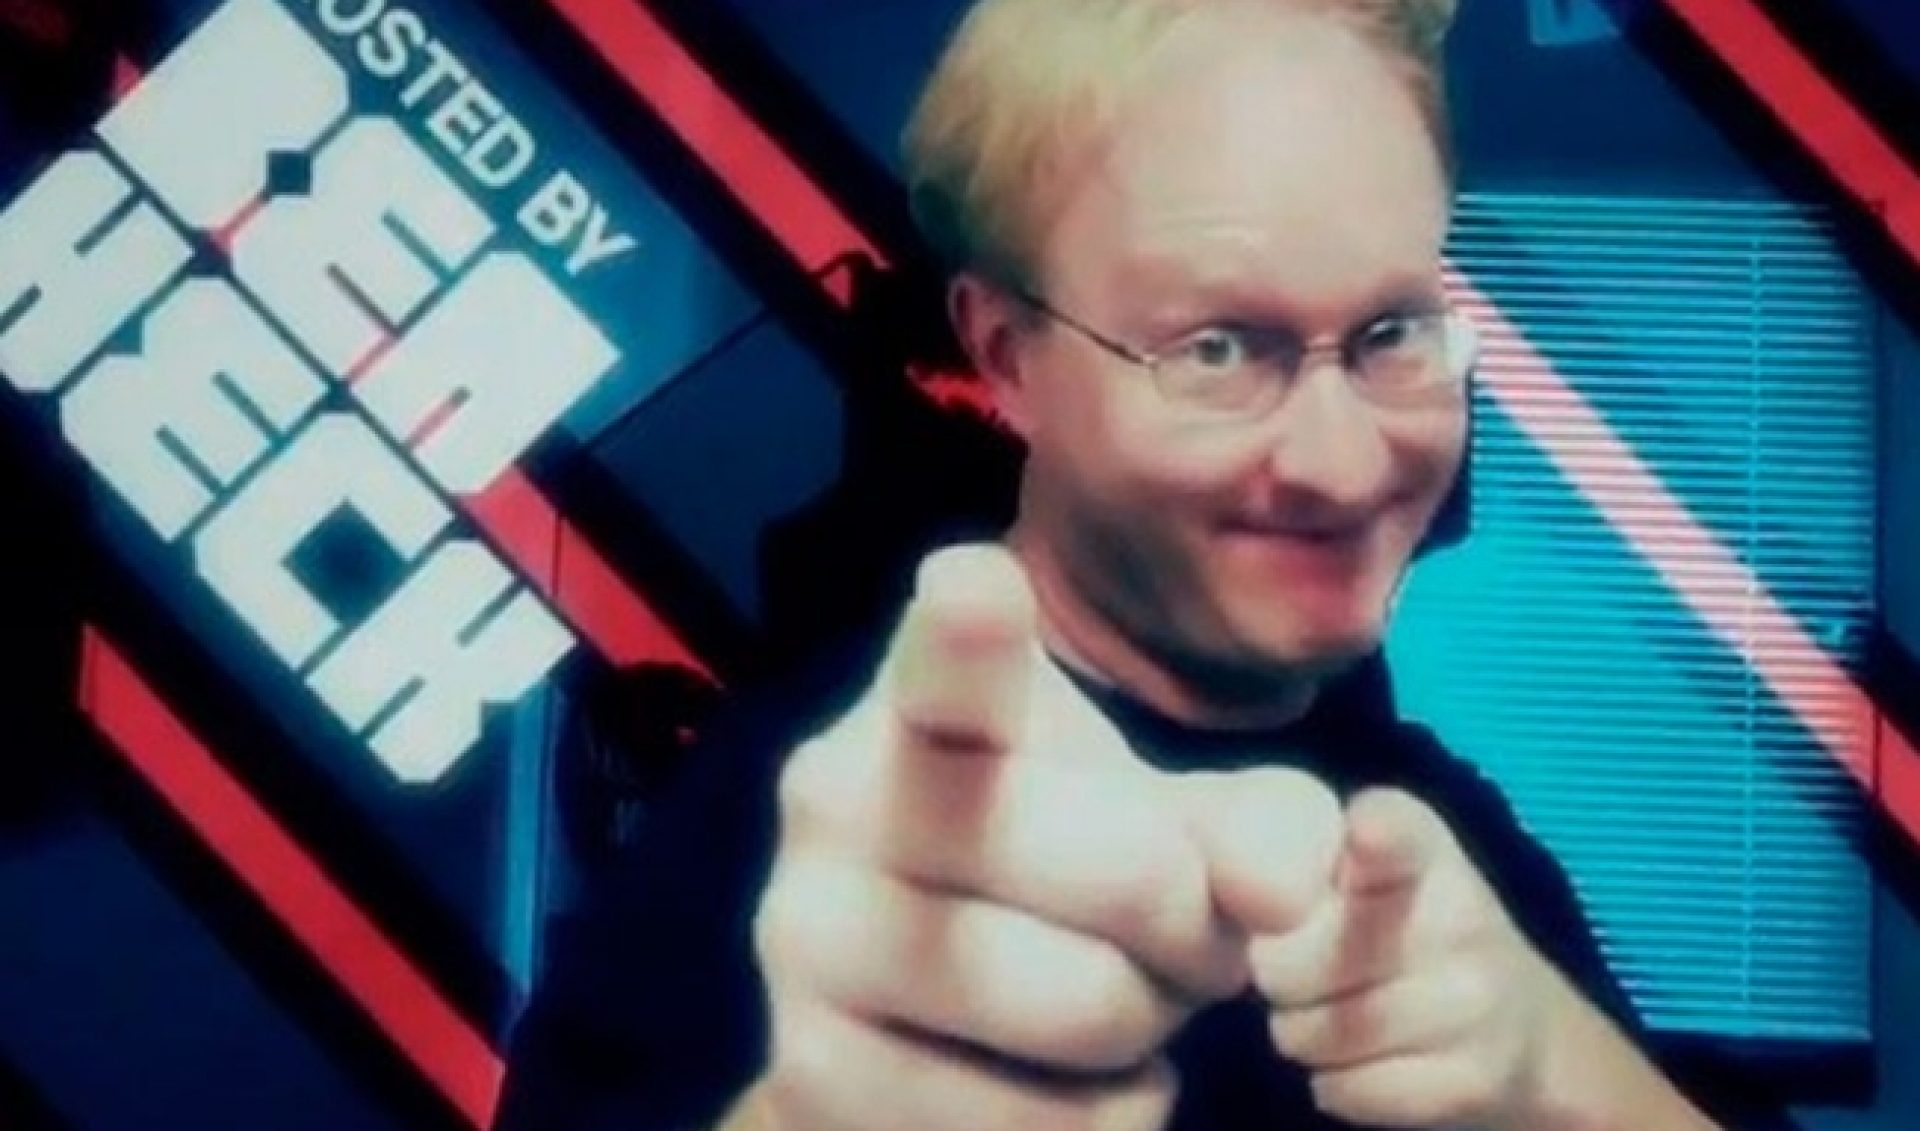 Learn How To Make Cool Gadgets With New Season Of ‘The Ben Heck Show’